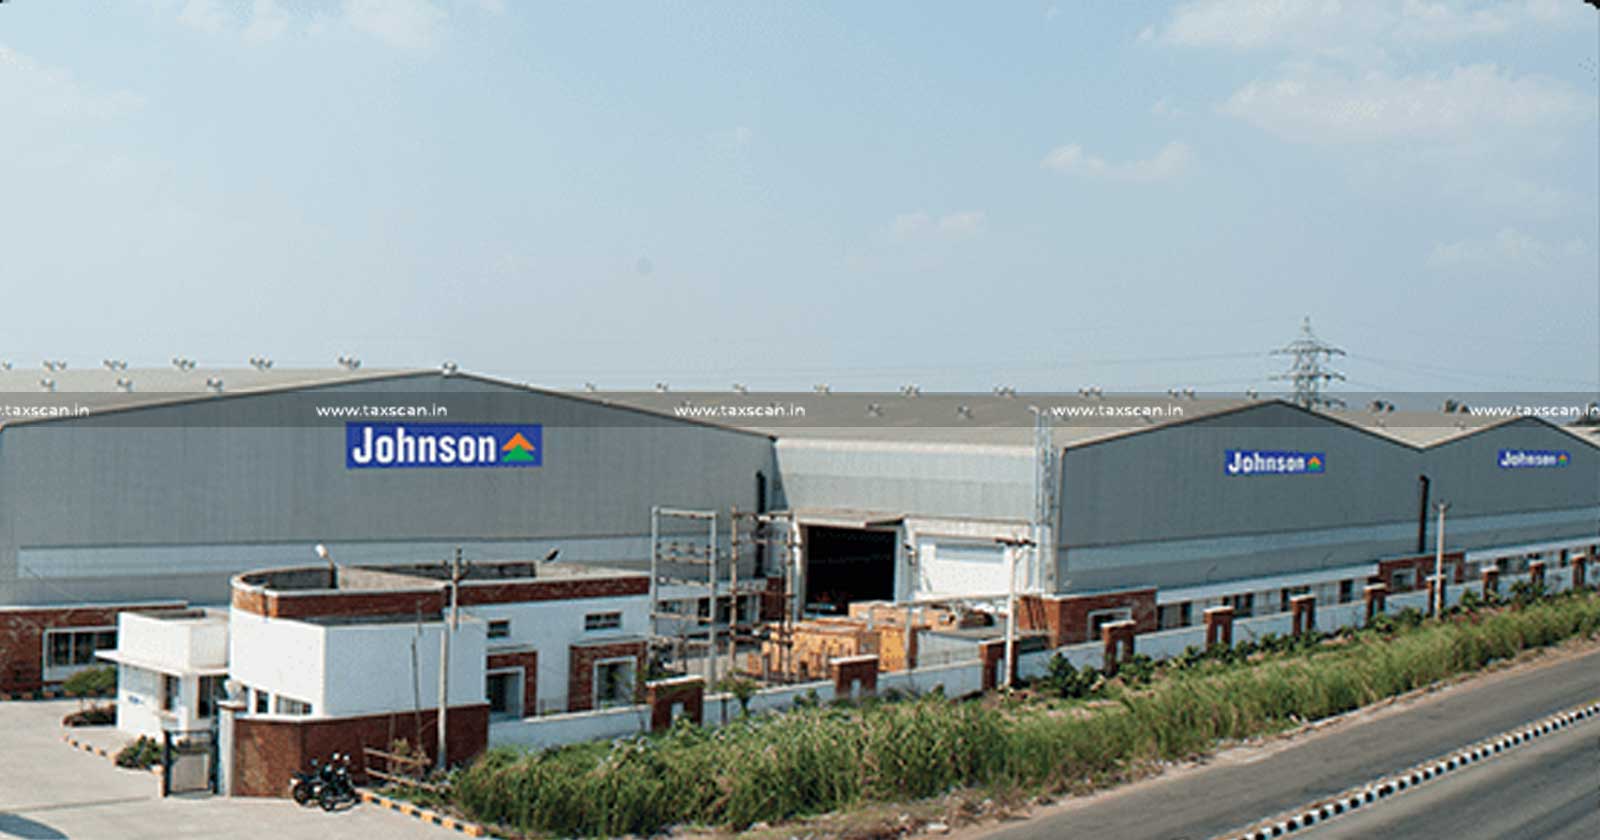 Relief to Johnson Lifts Pvt Ltd - Johnson Lifts Pvt Ltd - Order for Payment of Service Tax - Service Tax - Payment of VAT - VAT - CESTAT - taxscan